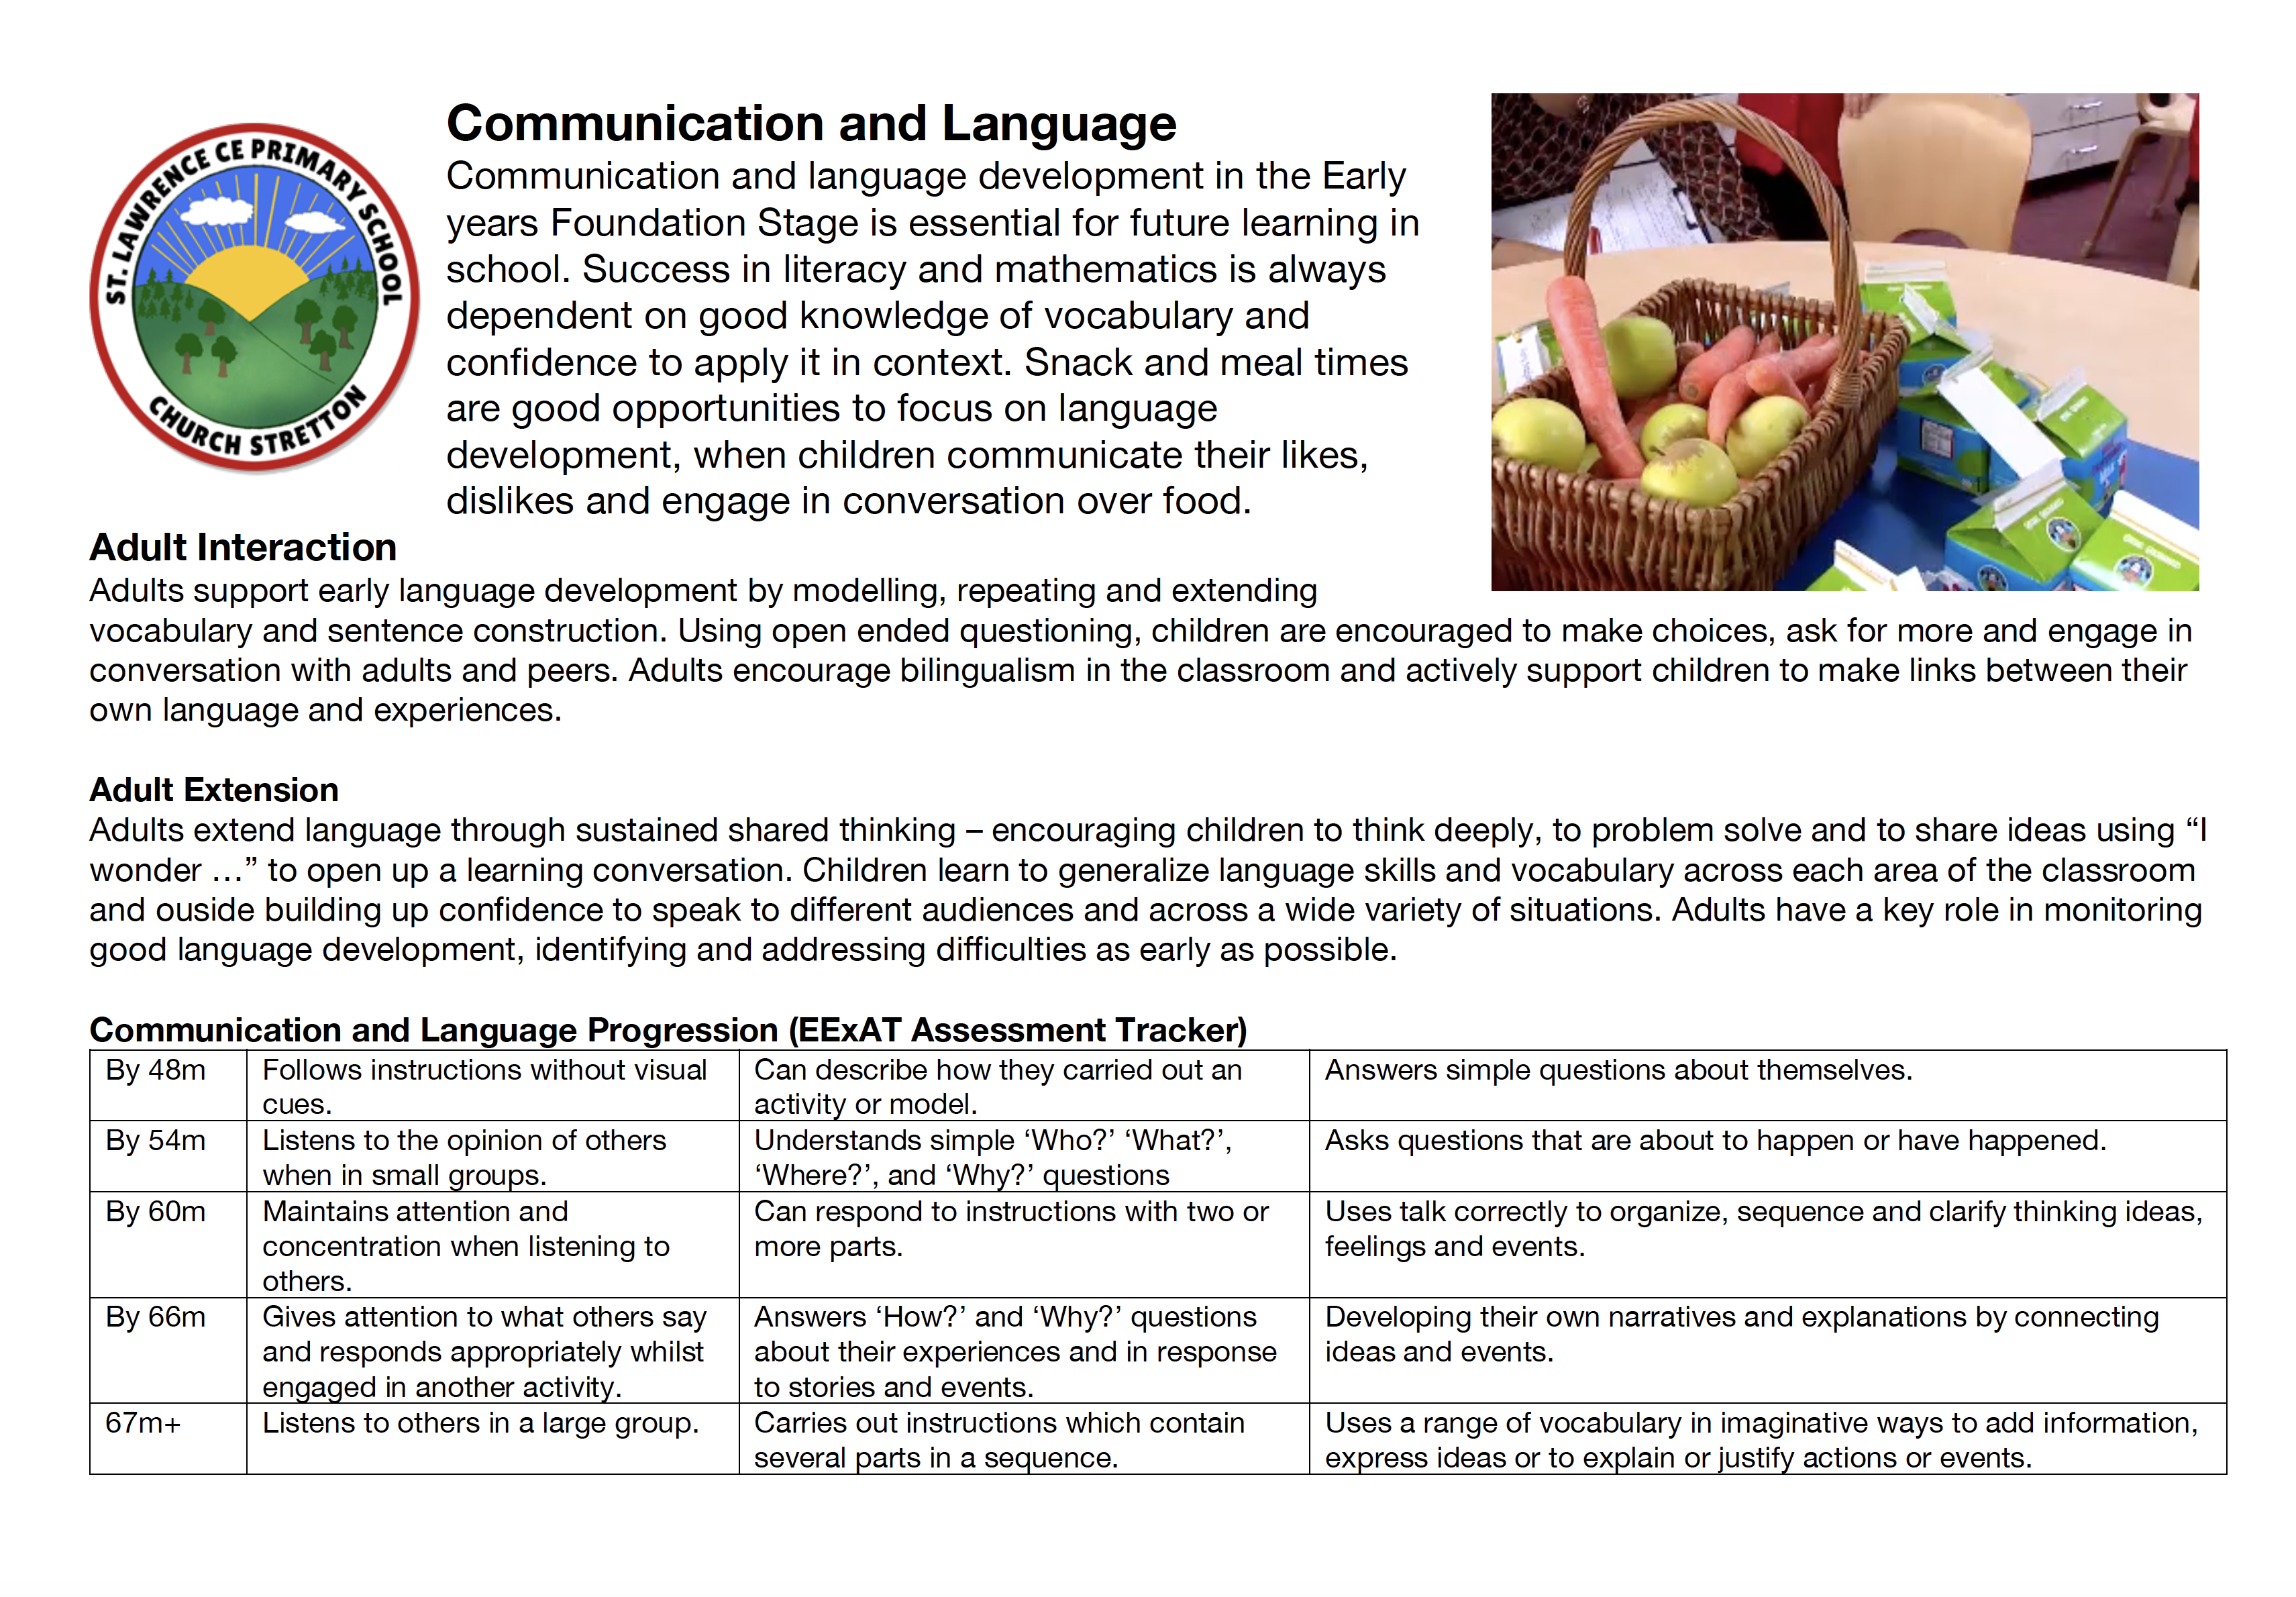 Continuous provision - Communication and Language